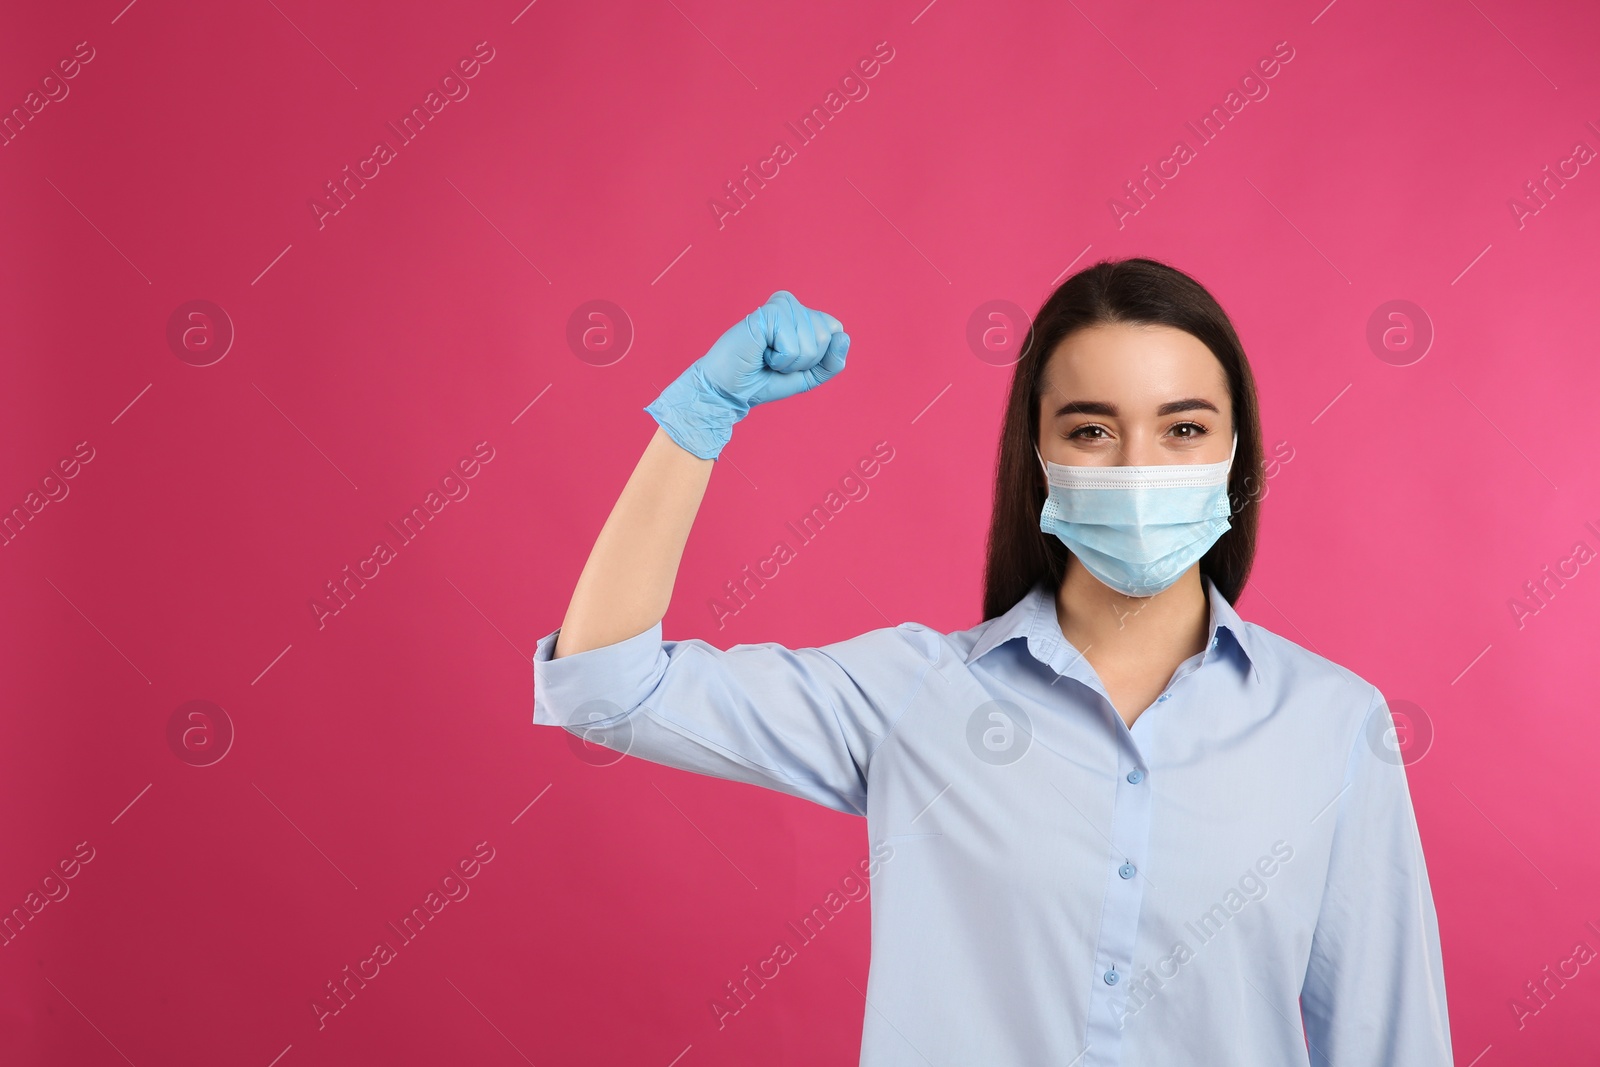 Photo of Woman with protective mask and gloves showing muscles on pink background, space for text. Strong immunity concept